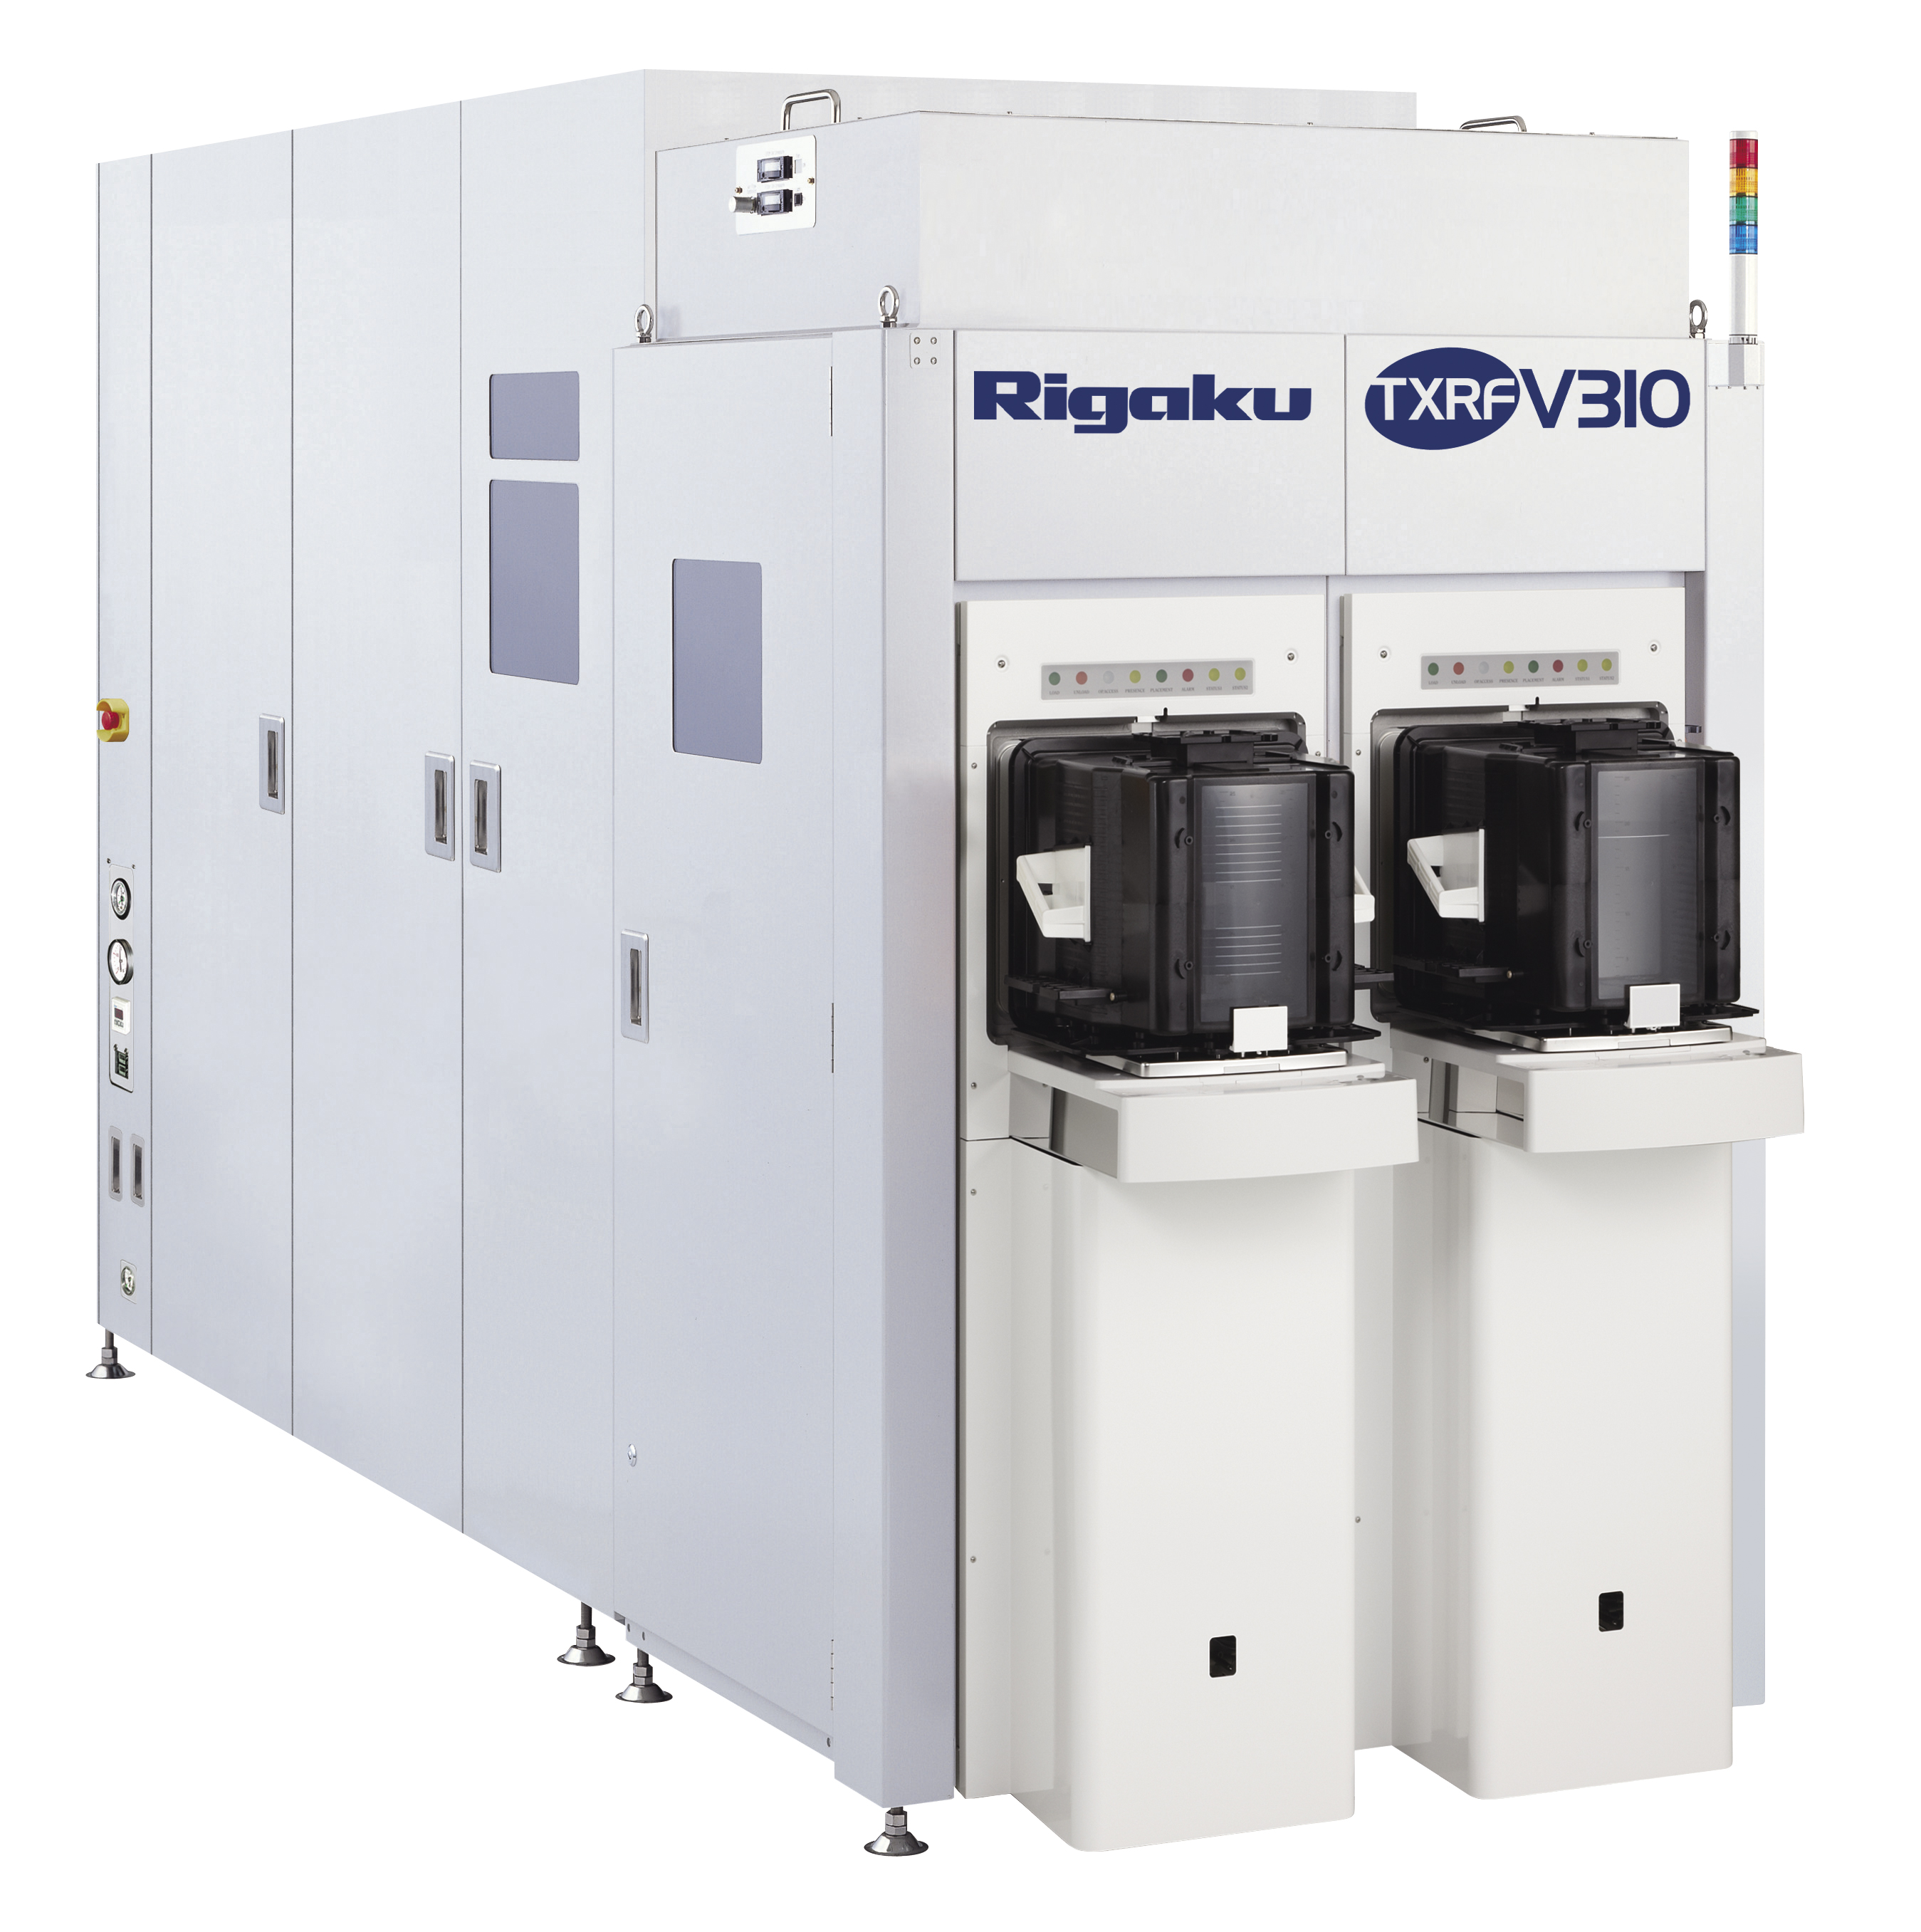 Rigaku TXRF-V310 Semiconductor metrology tool for Ultra-trace analysis of elemental surface contamination